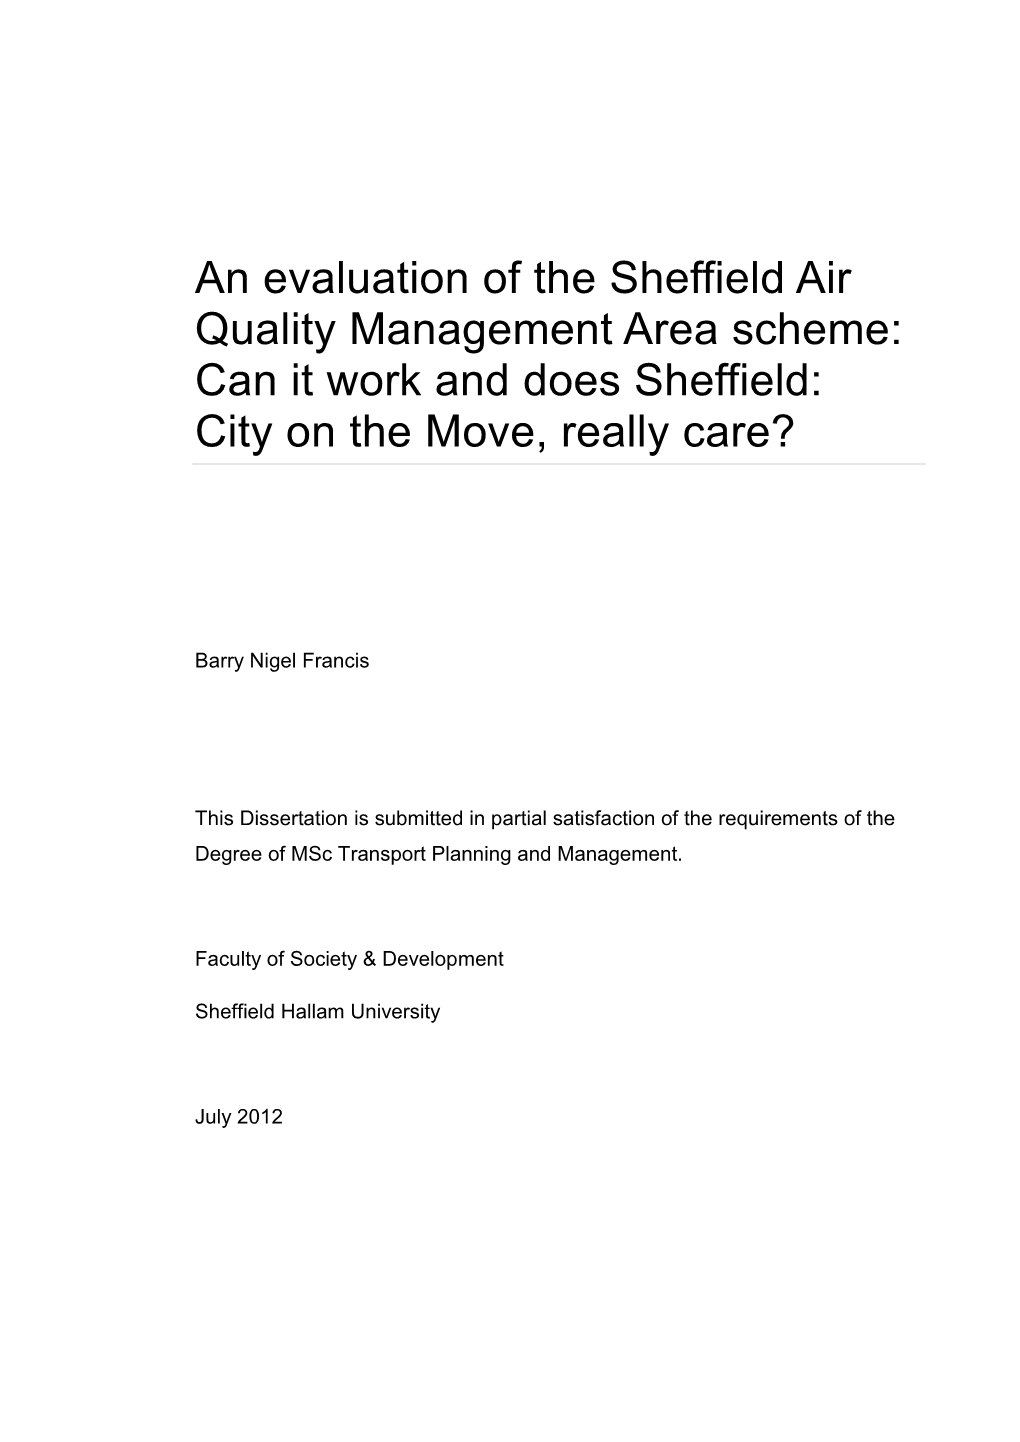 An Evaluation of the Sheffield Air Quality Management Area Scheme: Can It Work and Does Sheffield: City on the Move, Really Care?